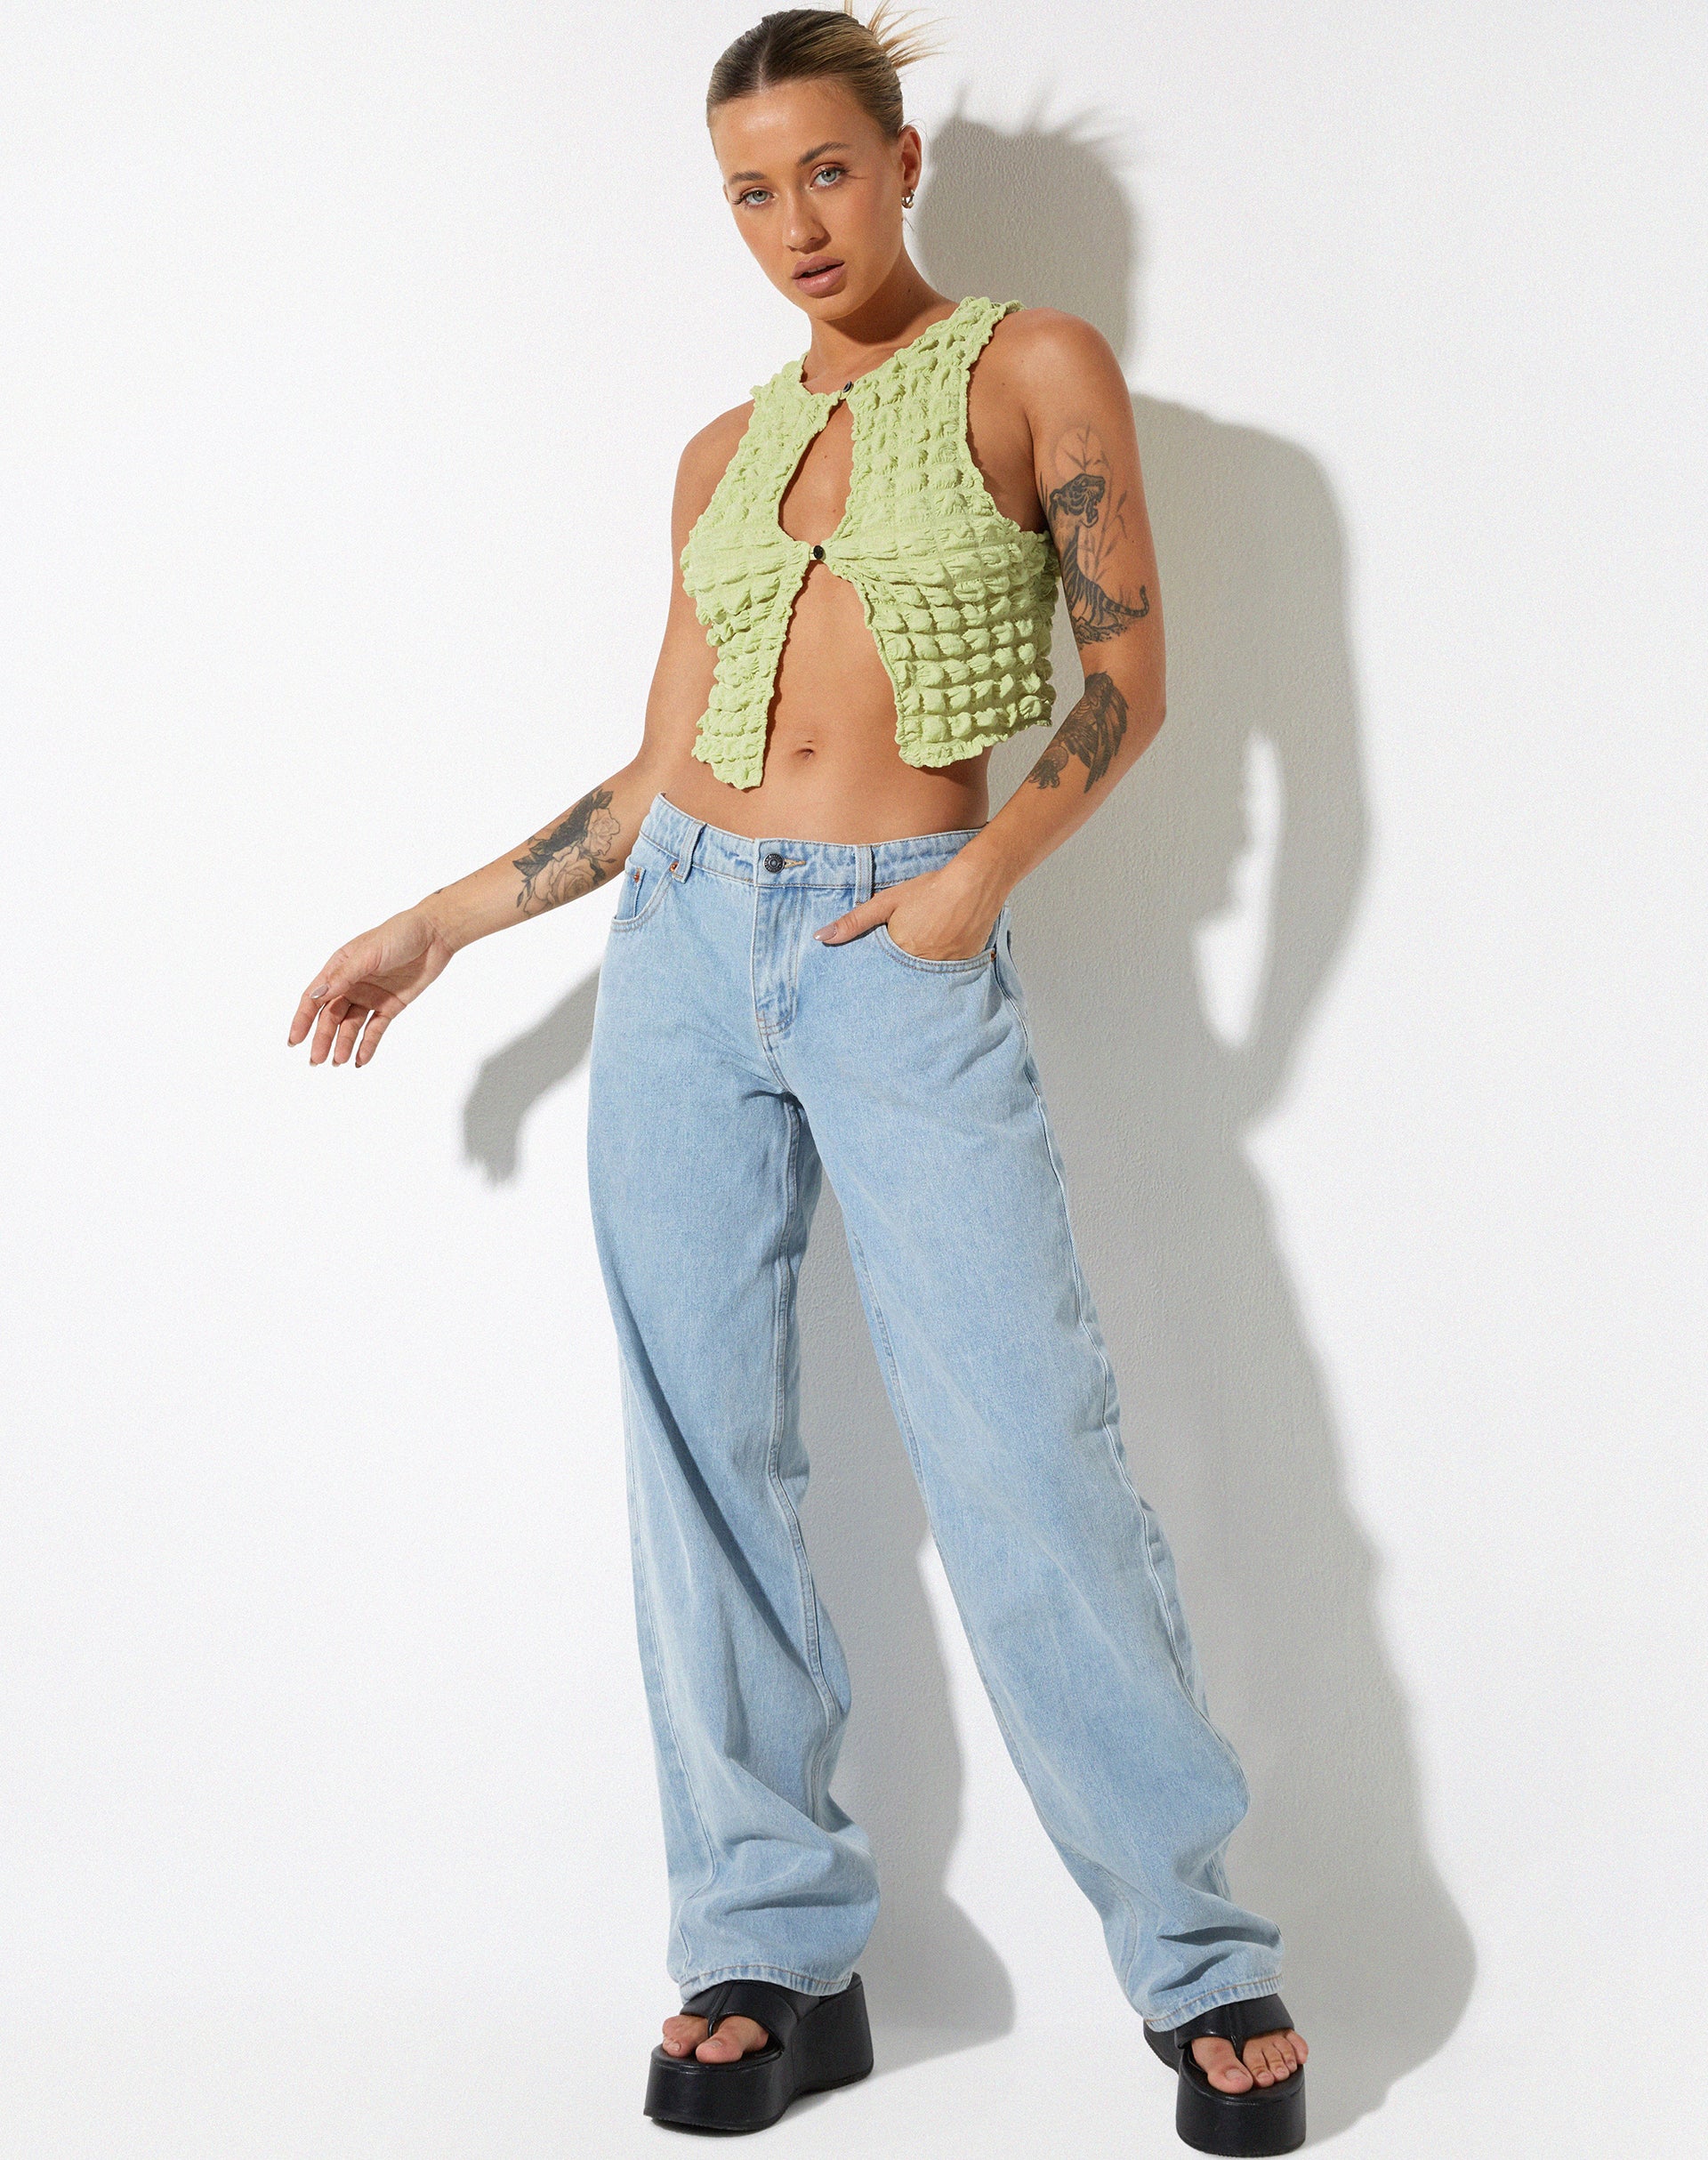 image of Neno Crop Top in Big Bubble Jersey Pastel Lime